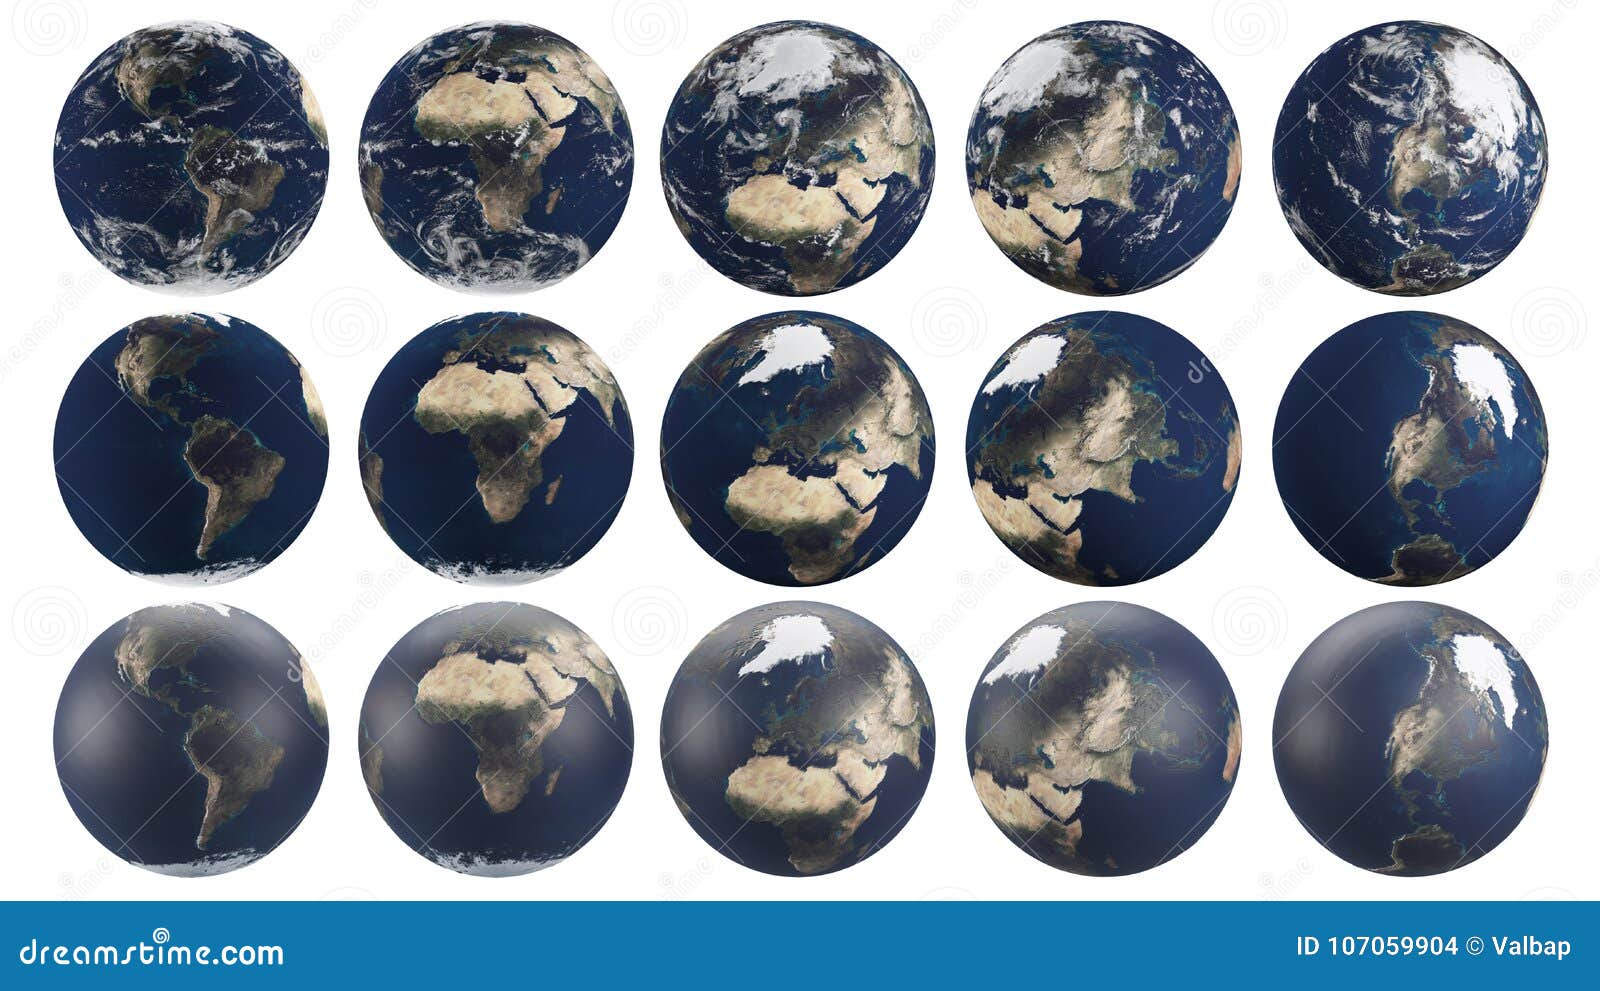 transparent planet earth from multiple angles focusing on different continents